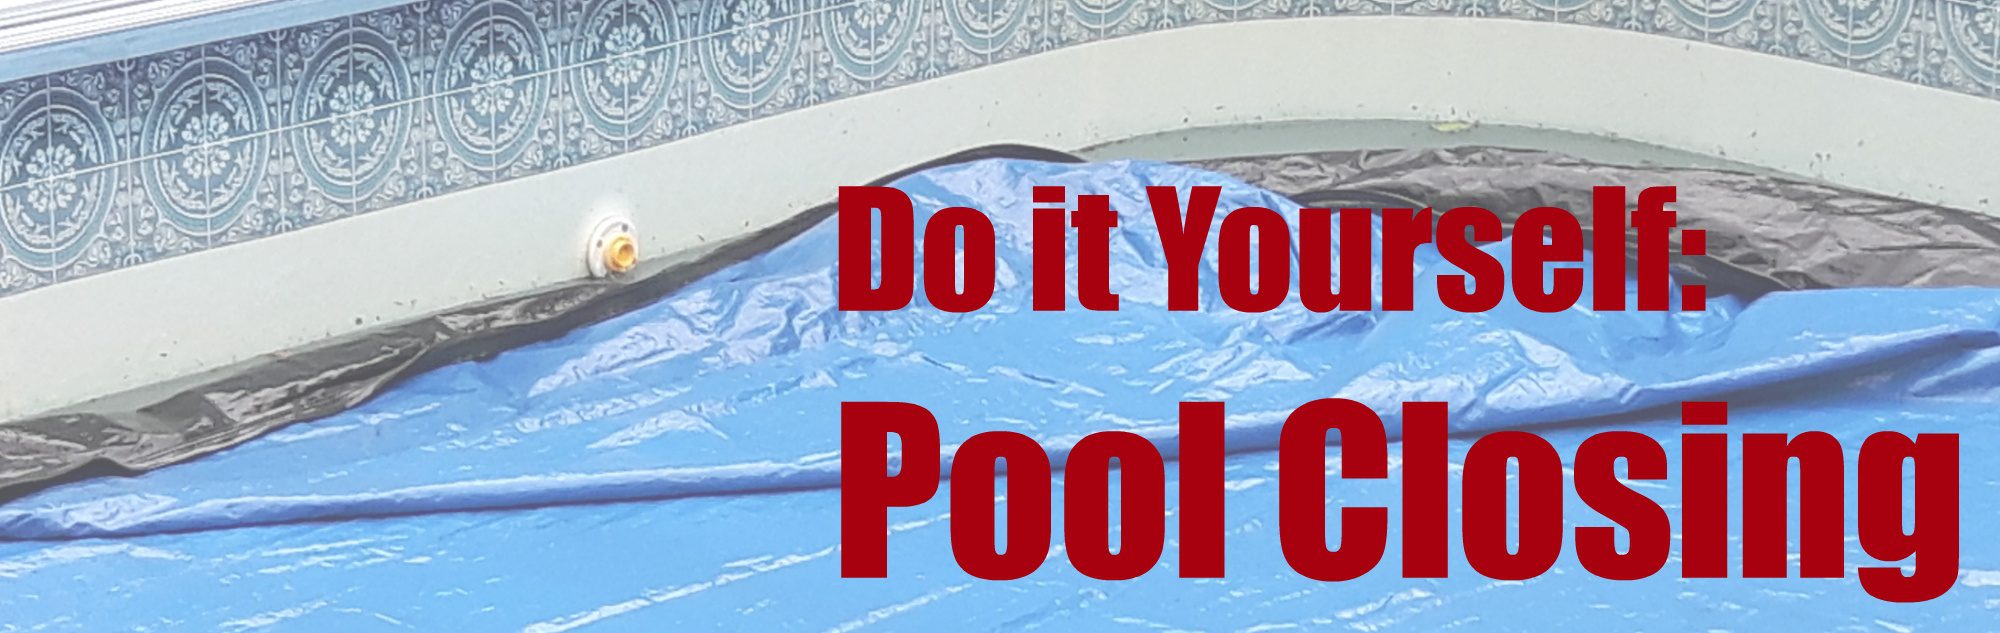 Do it Yourself Pool Closing R&R Pools